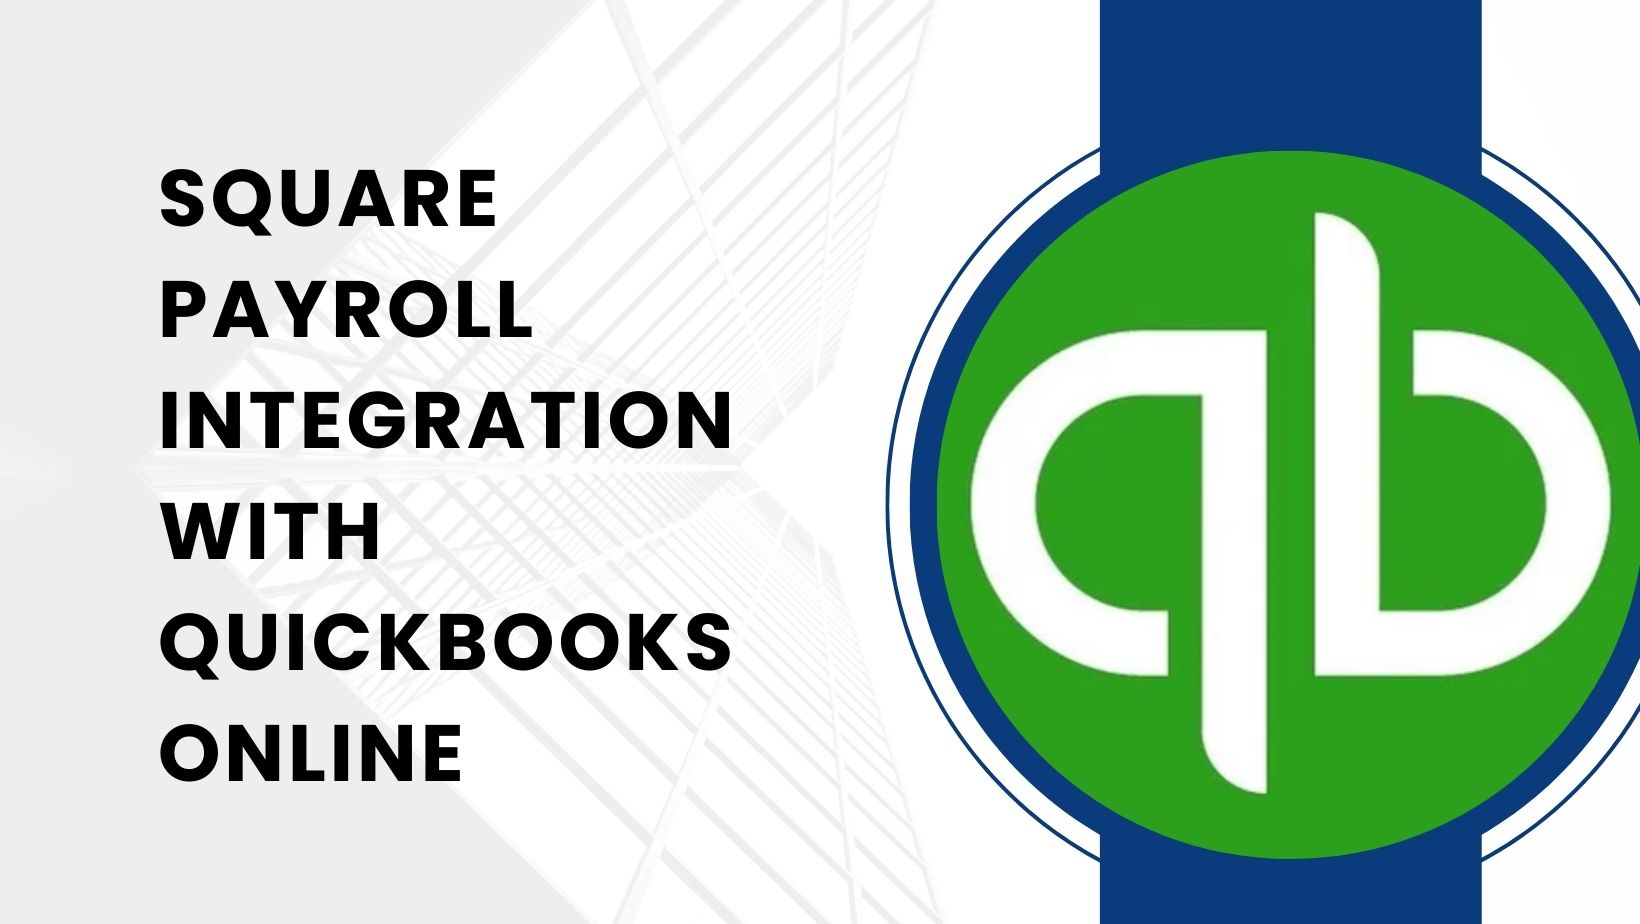 Square Payroll Integration With QuickBooks Online